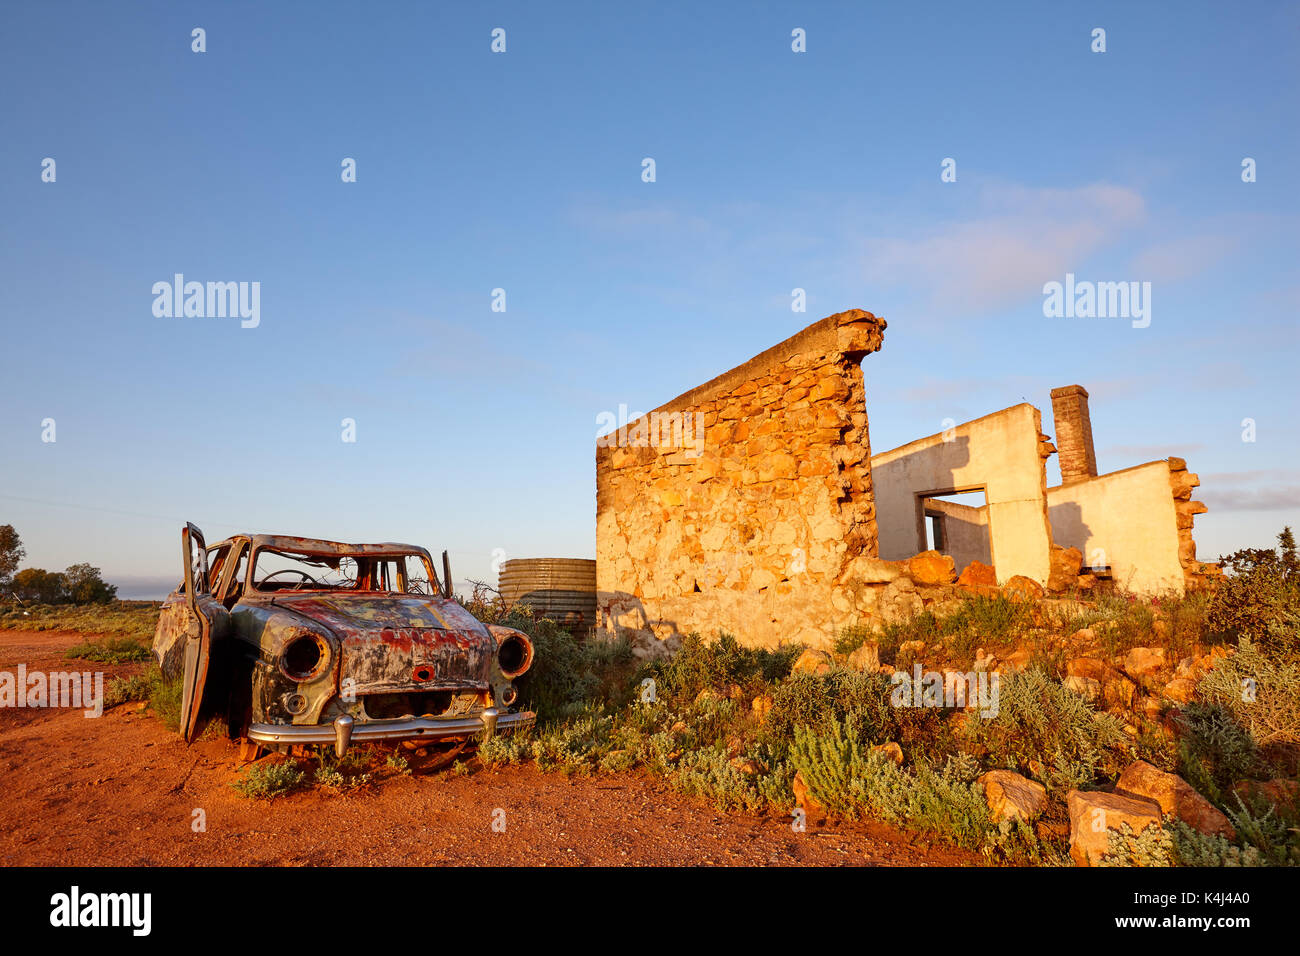 Early morning light on car and old building, Silverton, NSW, Australia. Stock Photo